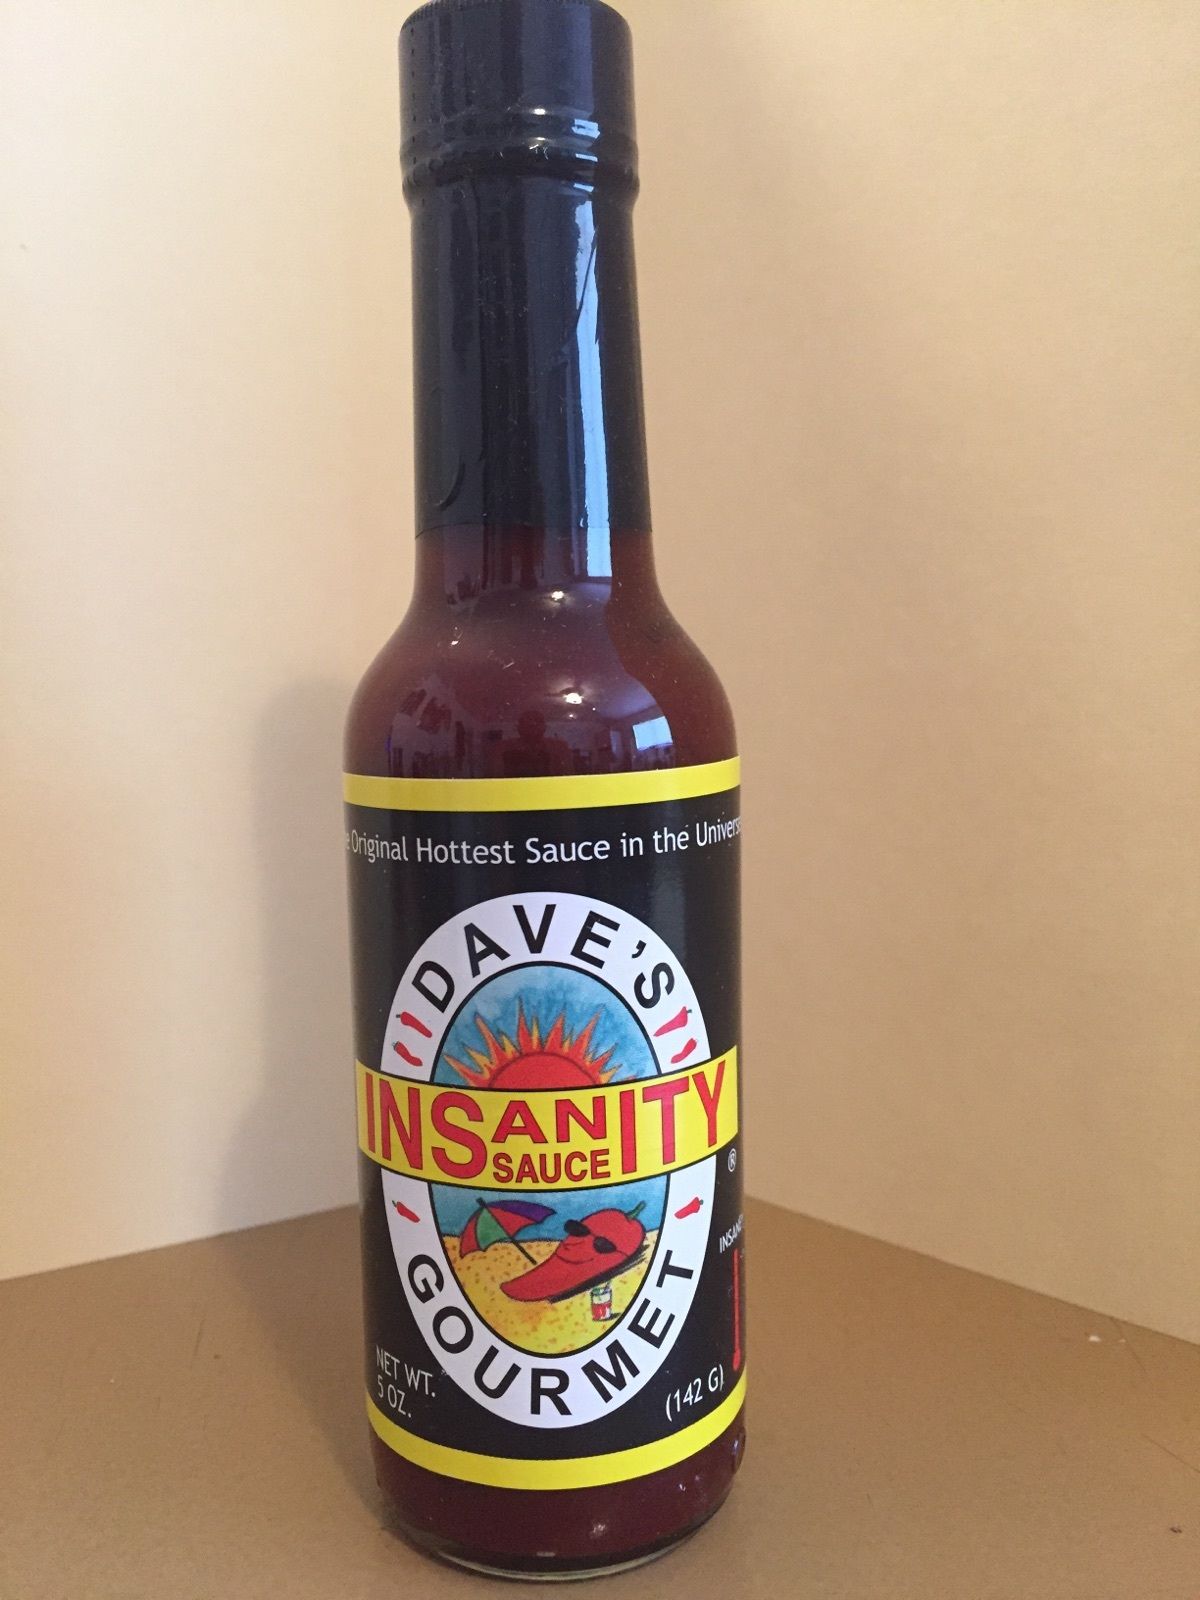 DAVES GOURMET INSANITY SAUCE 5OZ  Scorched Lizard Sauces